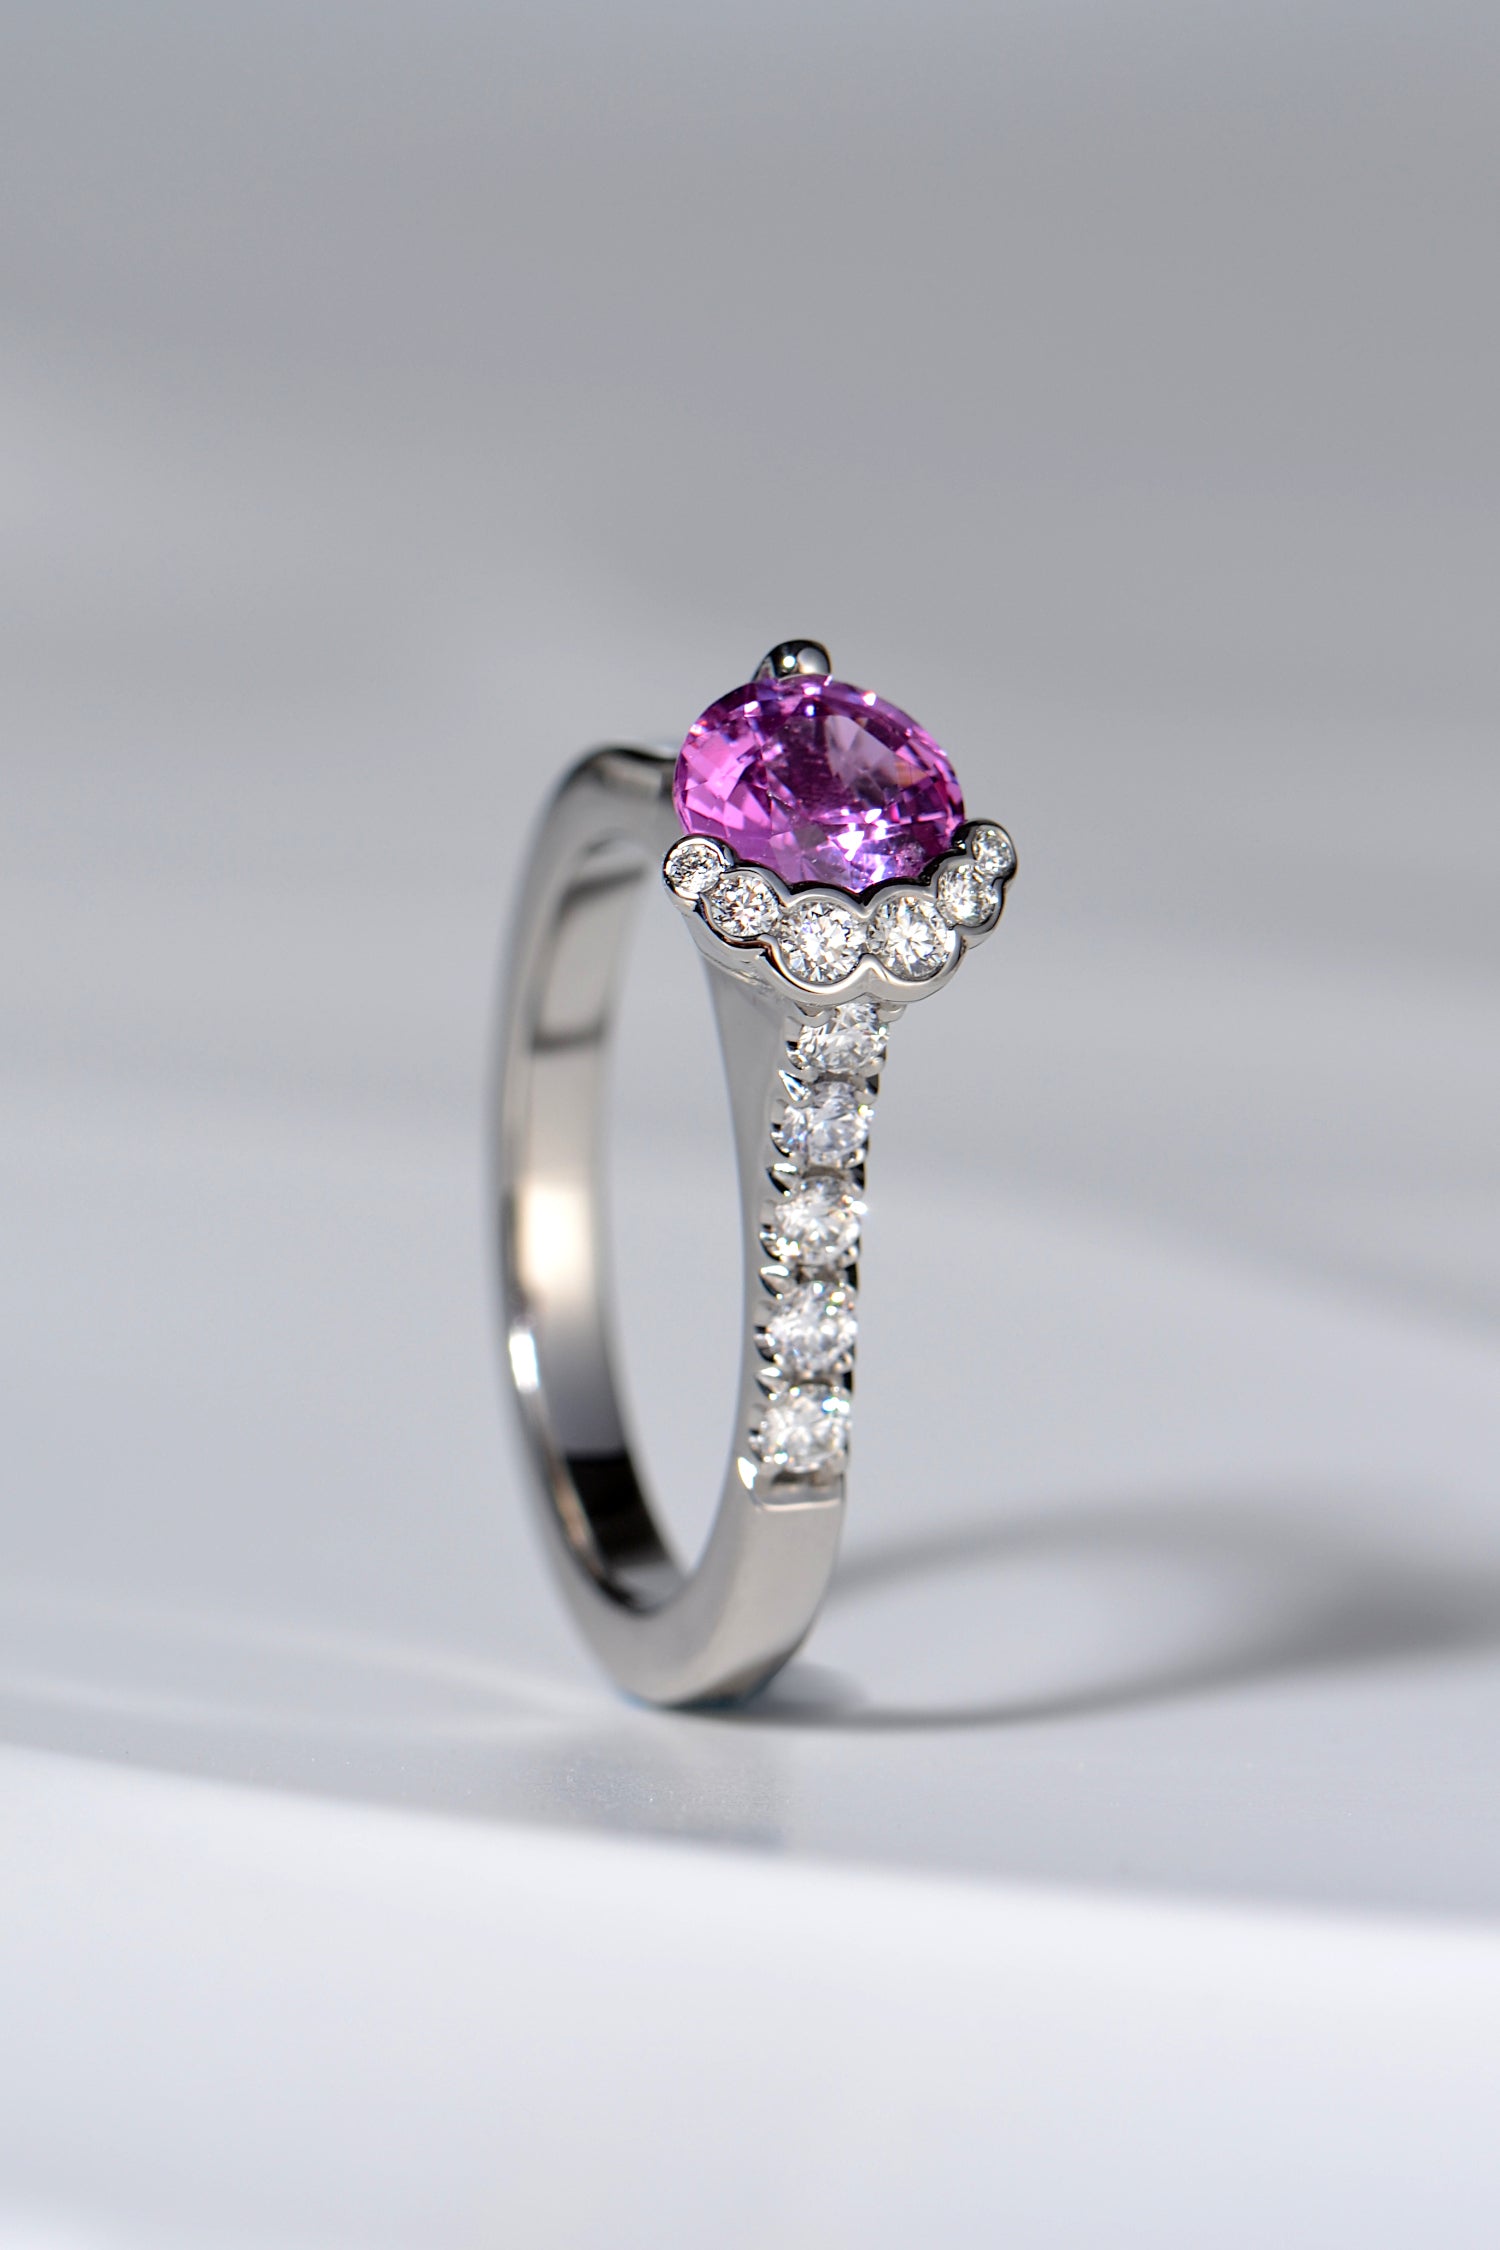 scottish designer engagement ring with a river of diamonds that flow out of a pink sapphire centre stone inspired by the Fairy Pools on the Isle of Skye